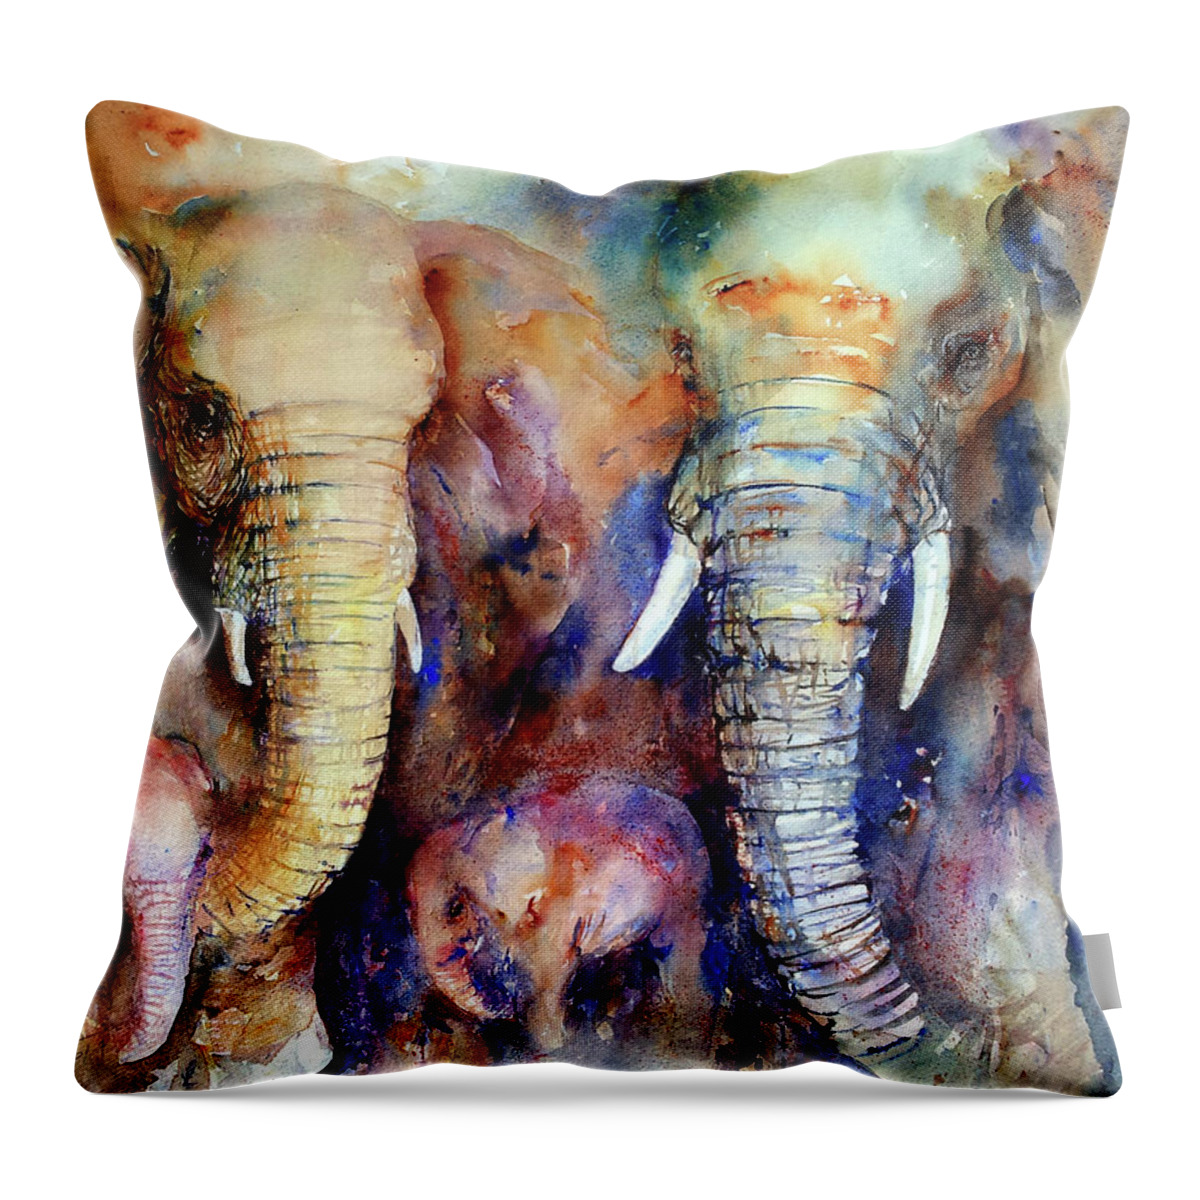 Elephants Throw Pillow featuring the painting Elephant Family by Arti Chauhan